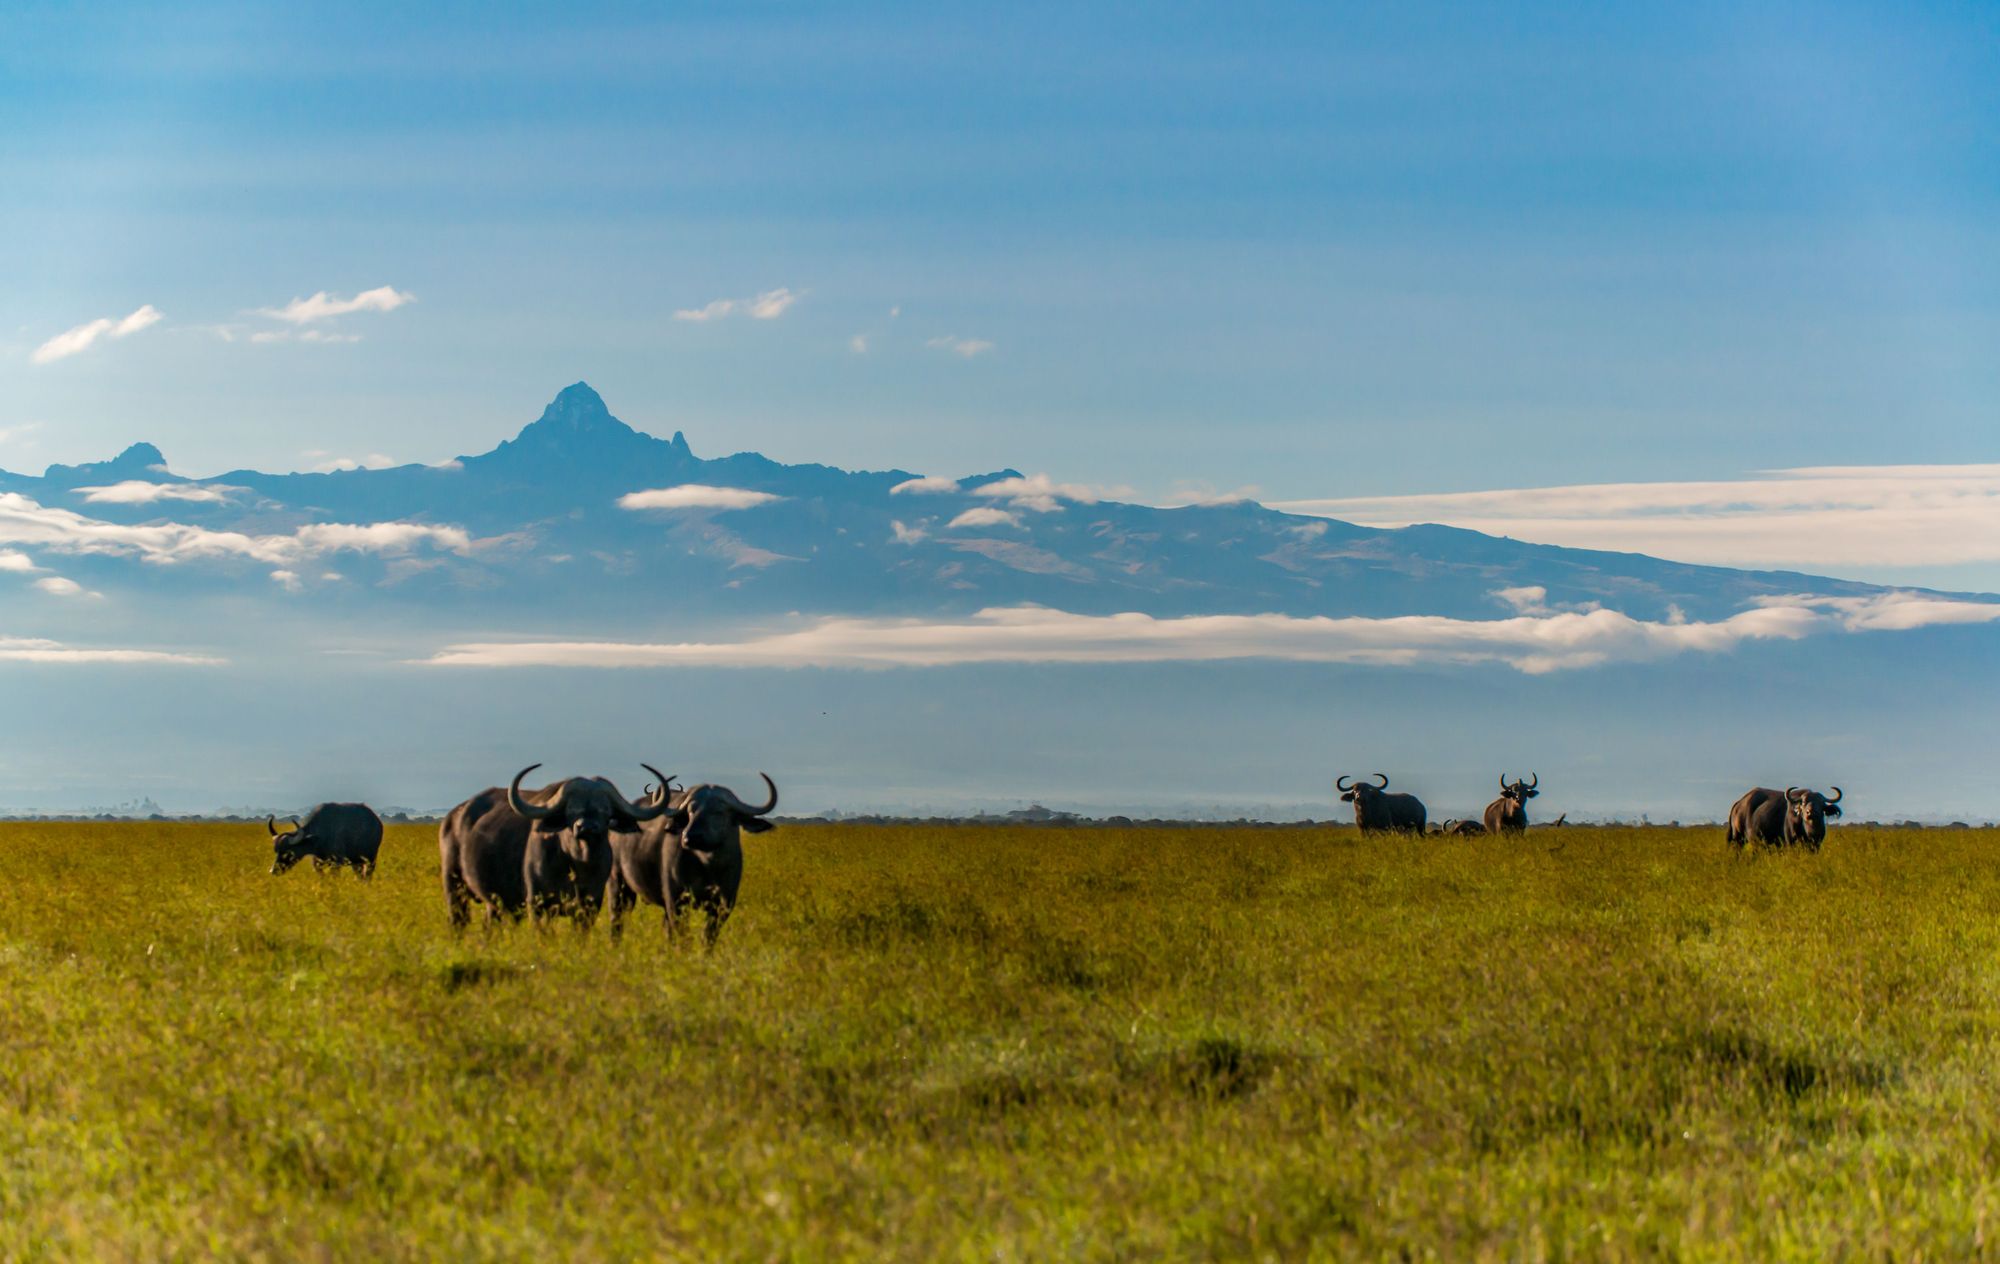 Mount Kenya as seen from Solio Ranch. Photo: Getty